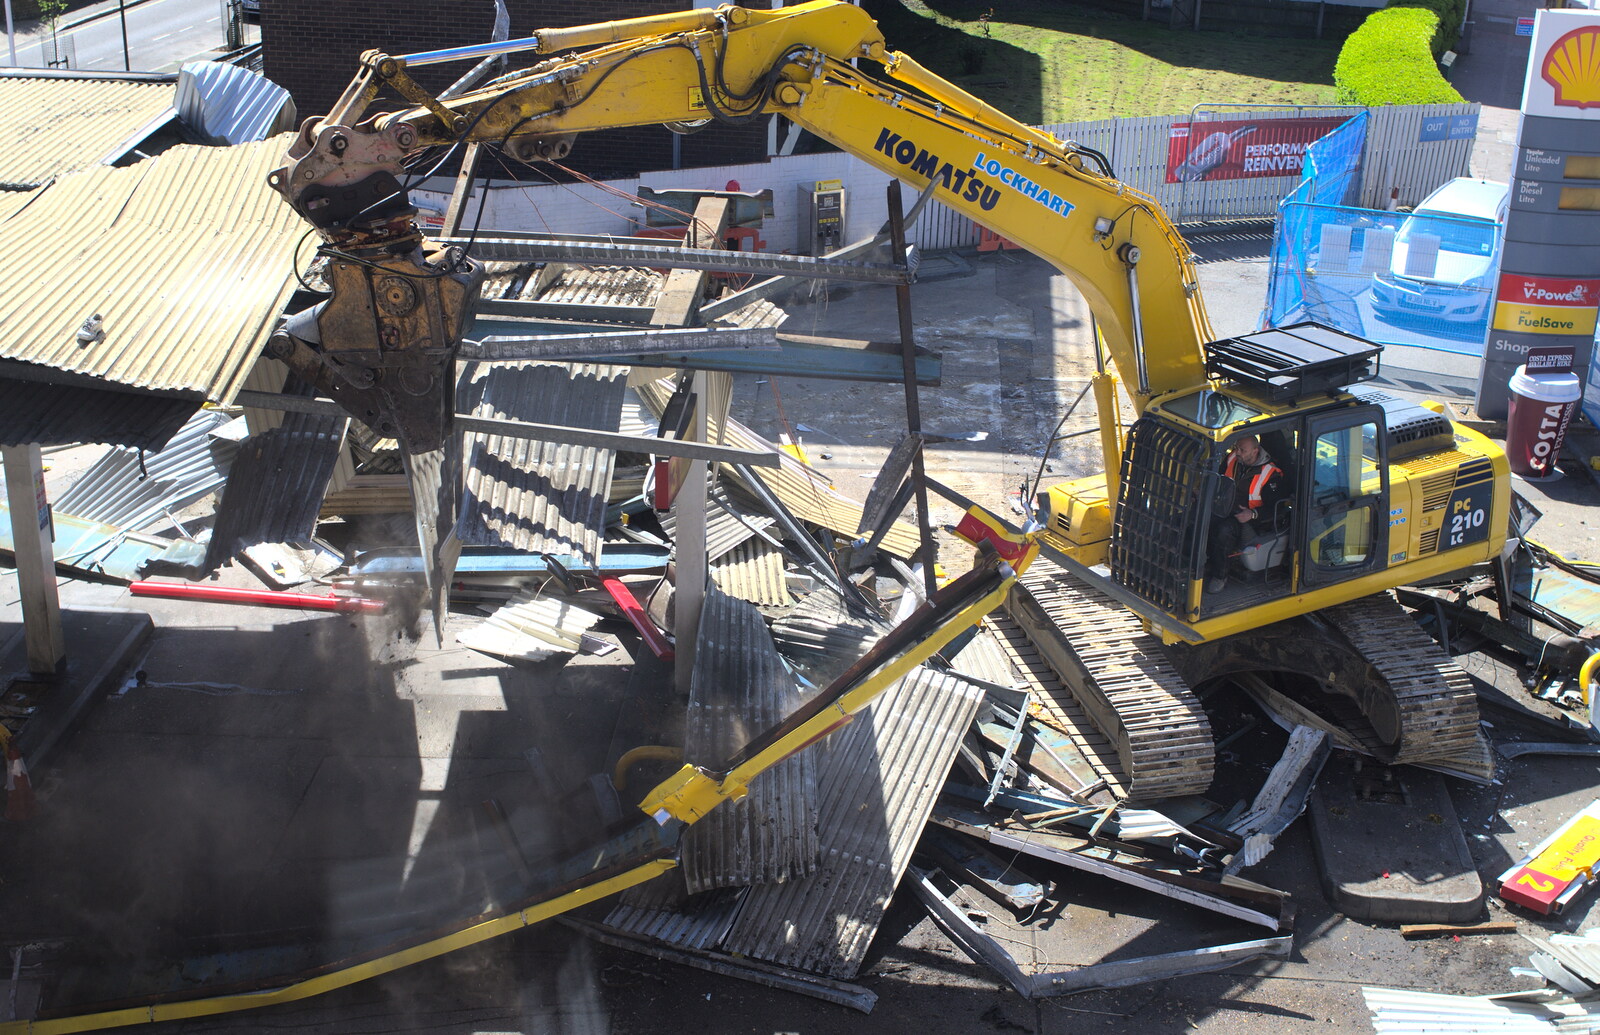 A scene of chaos from The Garage-Eating Monster of Southwark, London - 1st May 2013